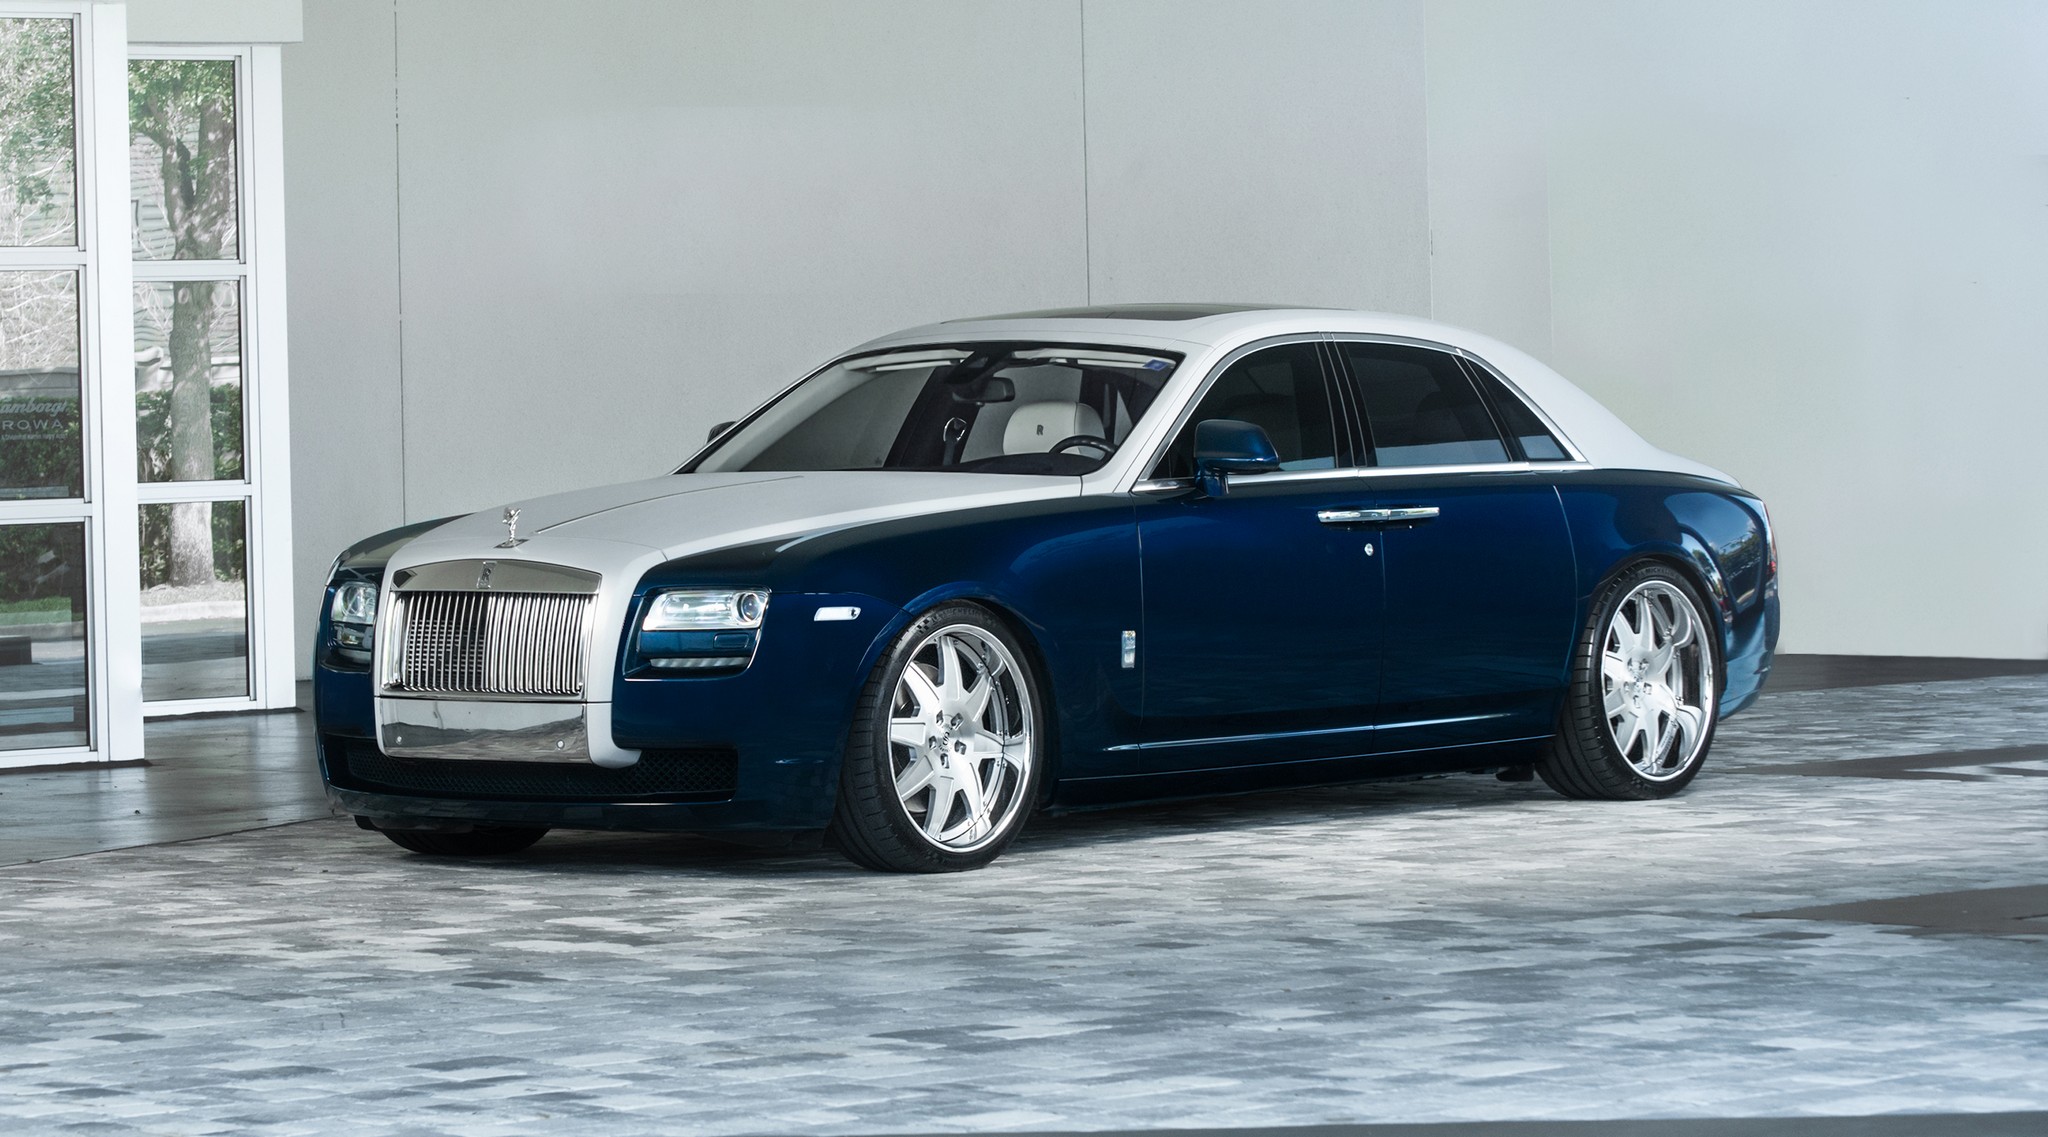 Rolls Royce Ghost with 24in Vossen HF2 Wheels exclusively from Butler Tires  and Wheels in Atlanta GA  Image Number 11881